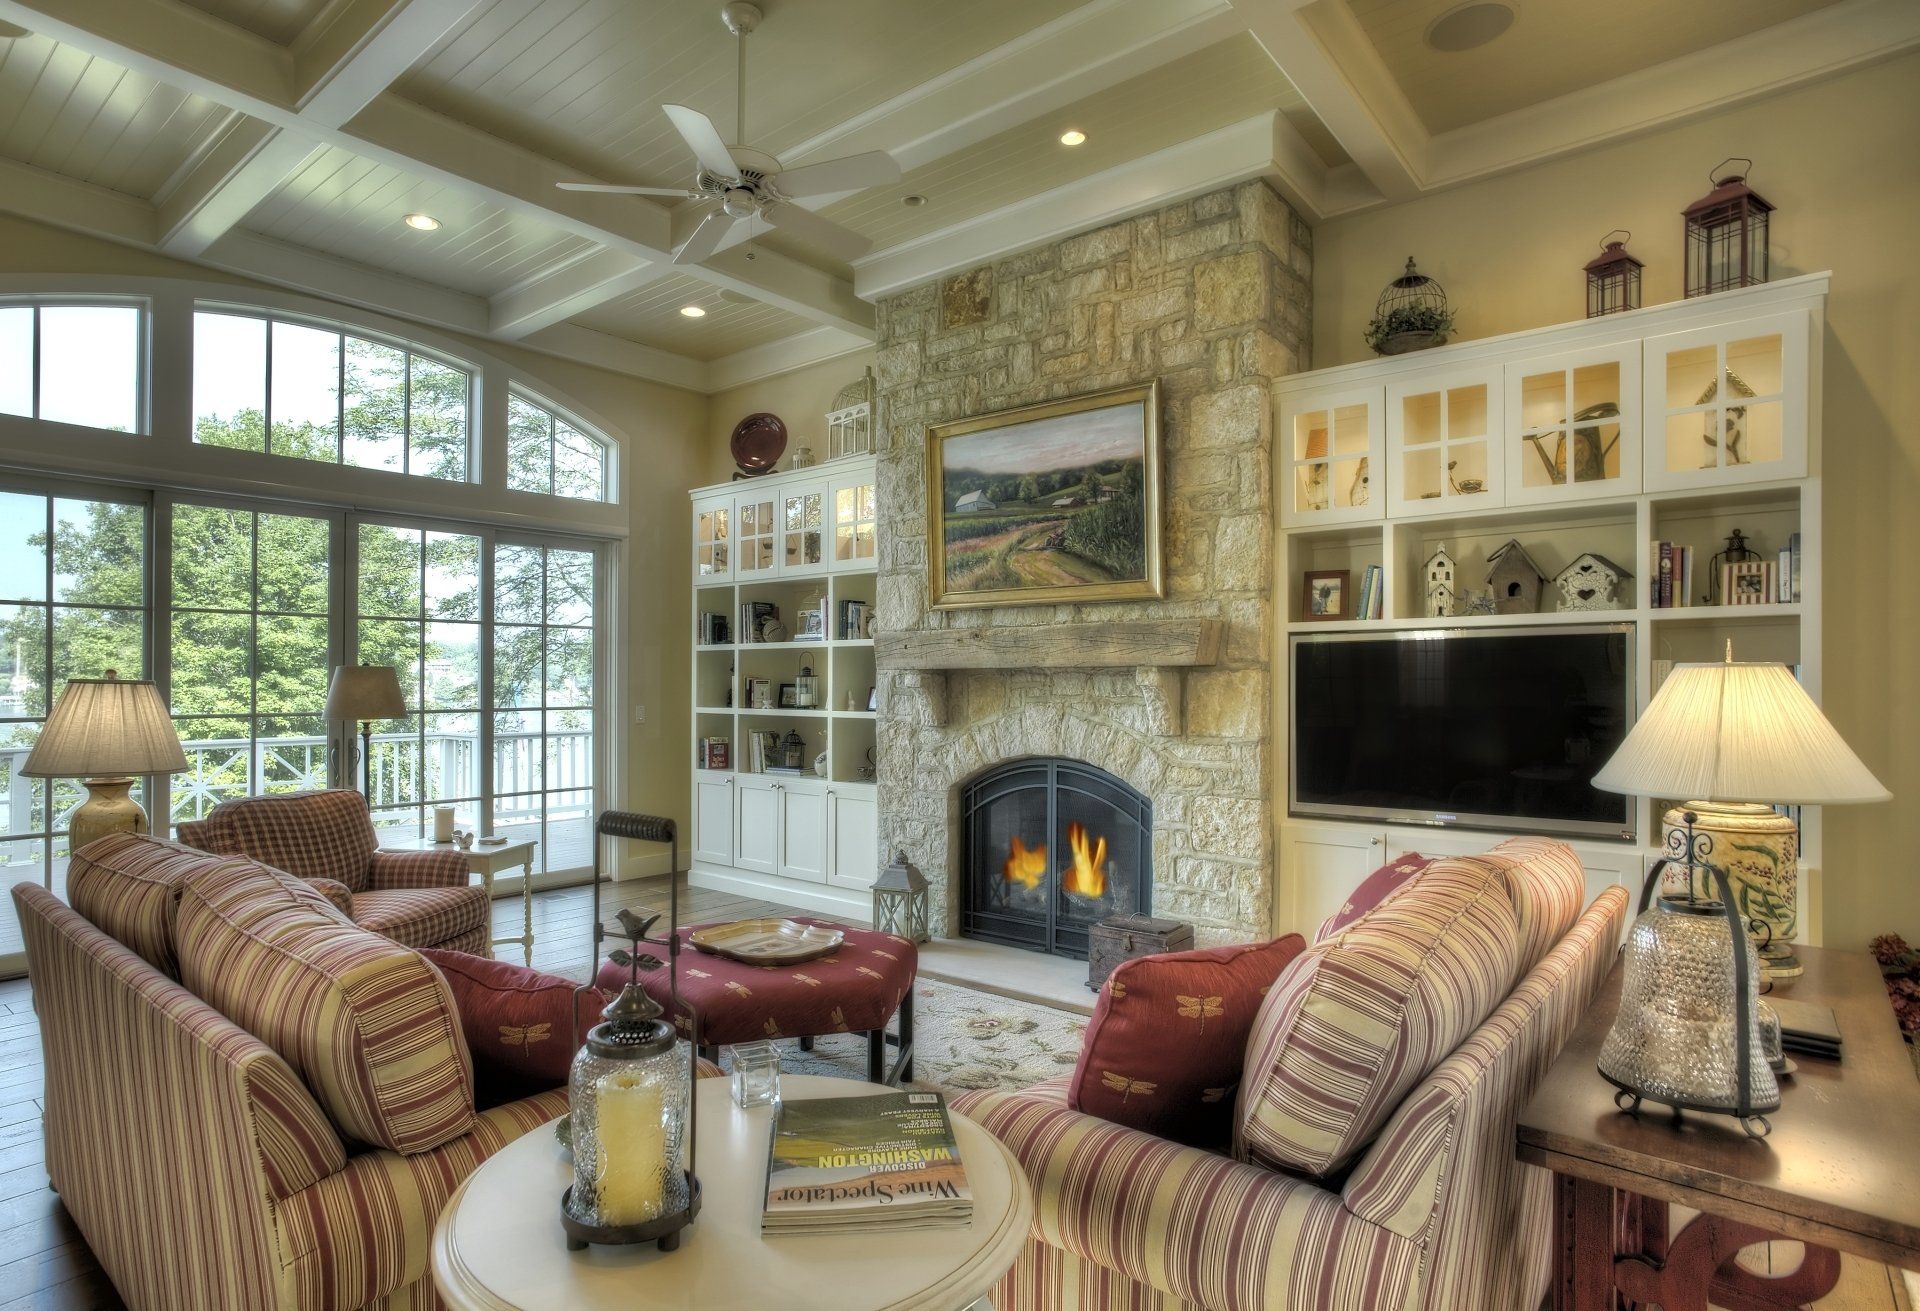 Beautiful room with cabinets on both sides of the bricked fireplace.